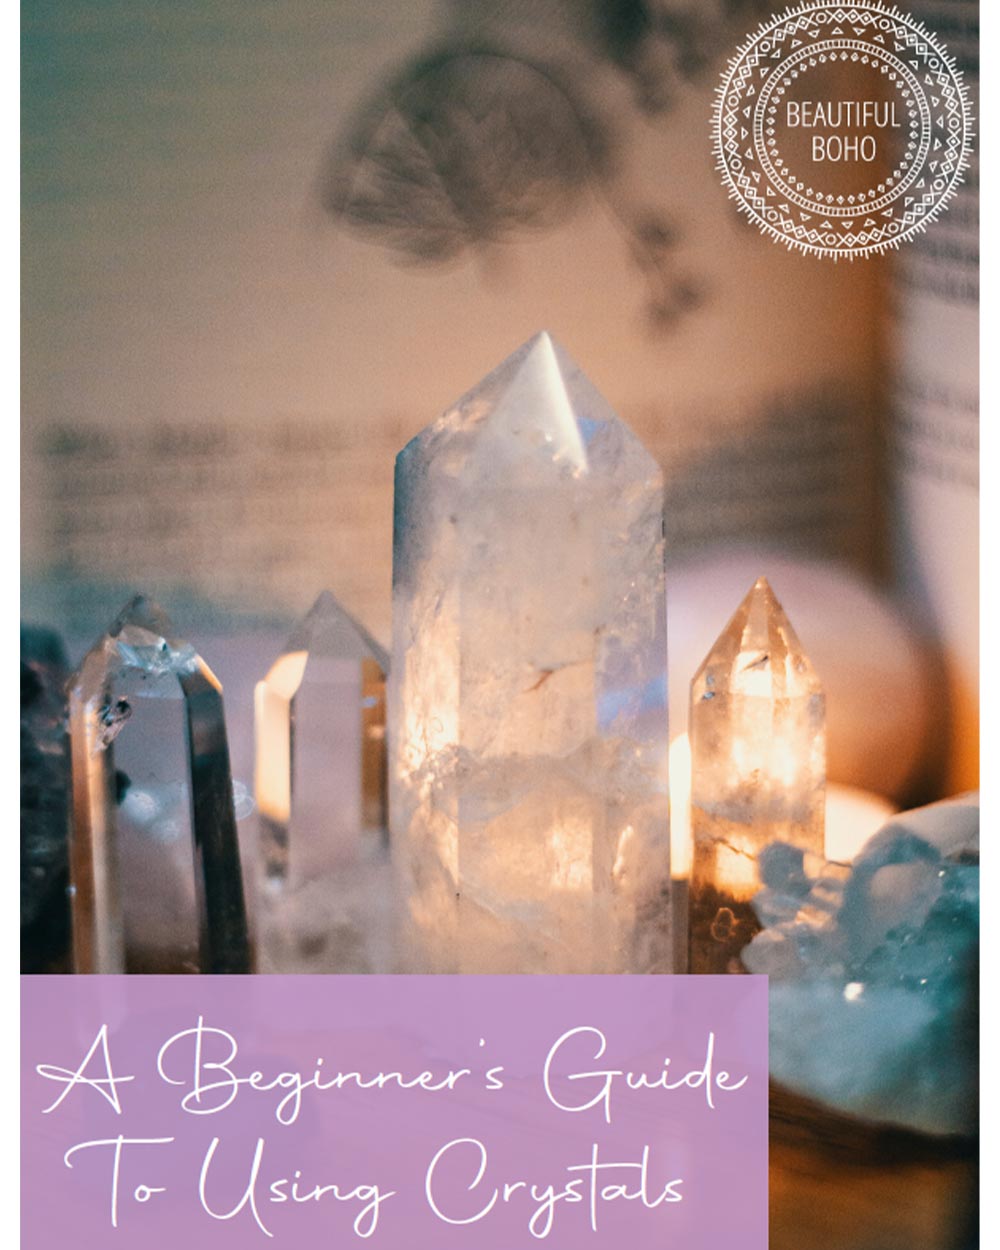 A Beginners Guide to Using Crystals (Download)